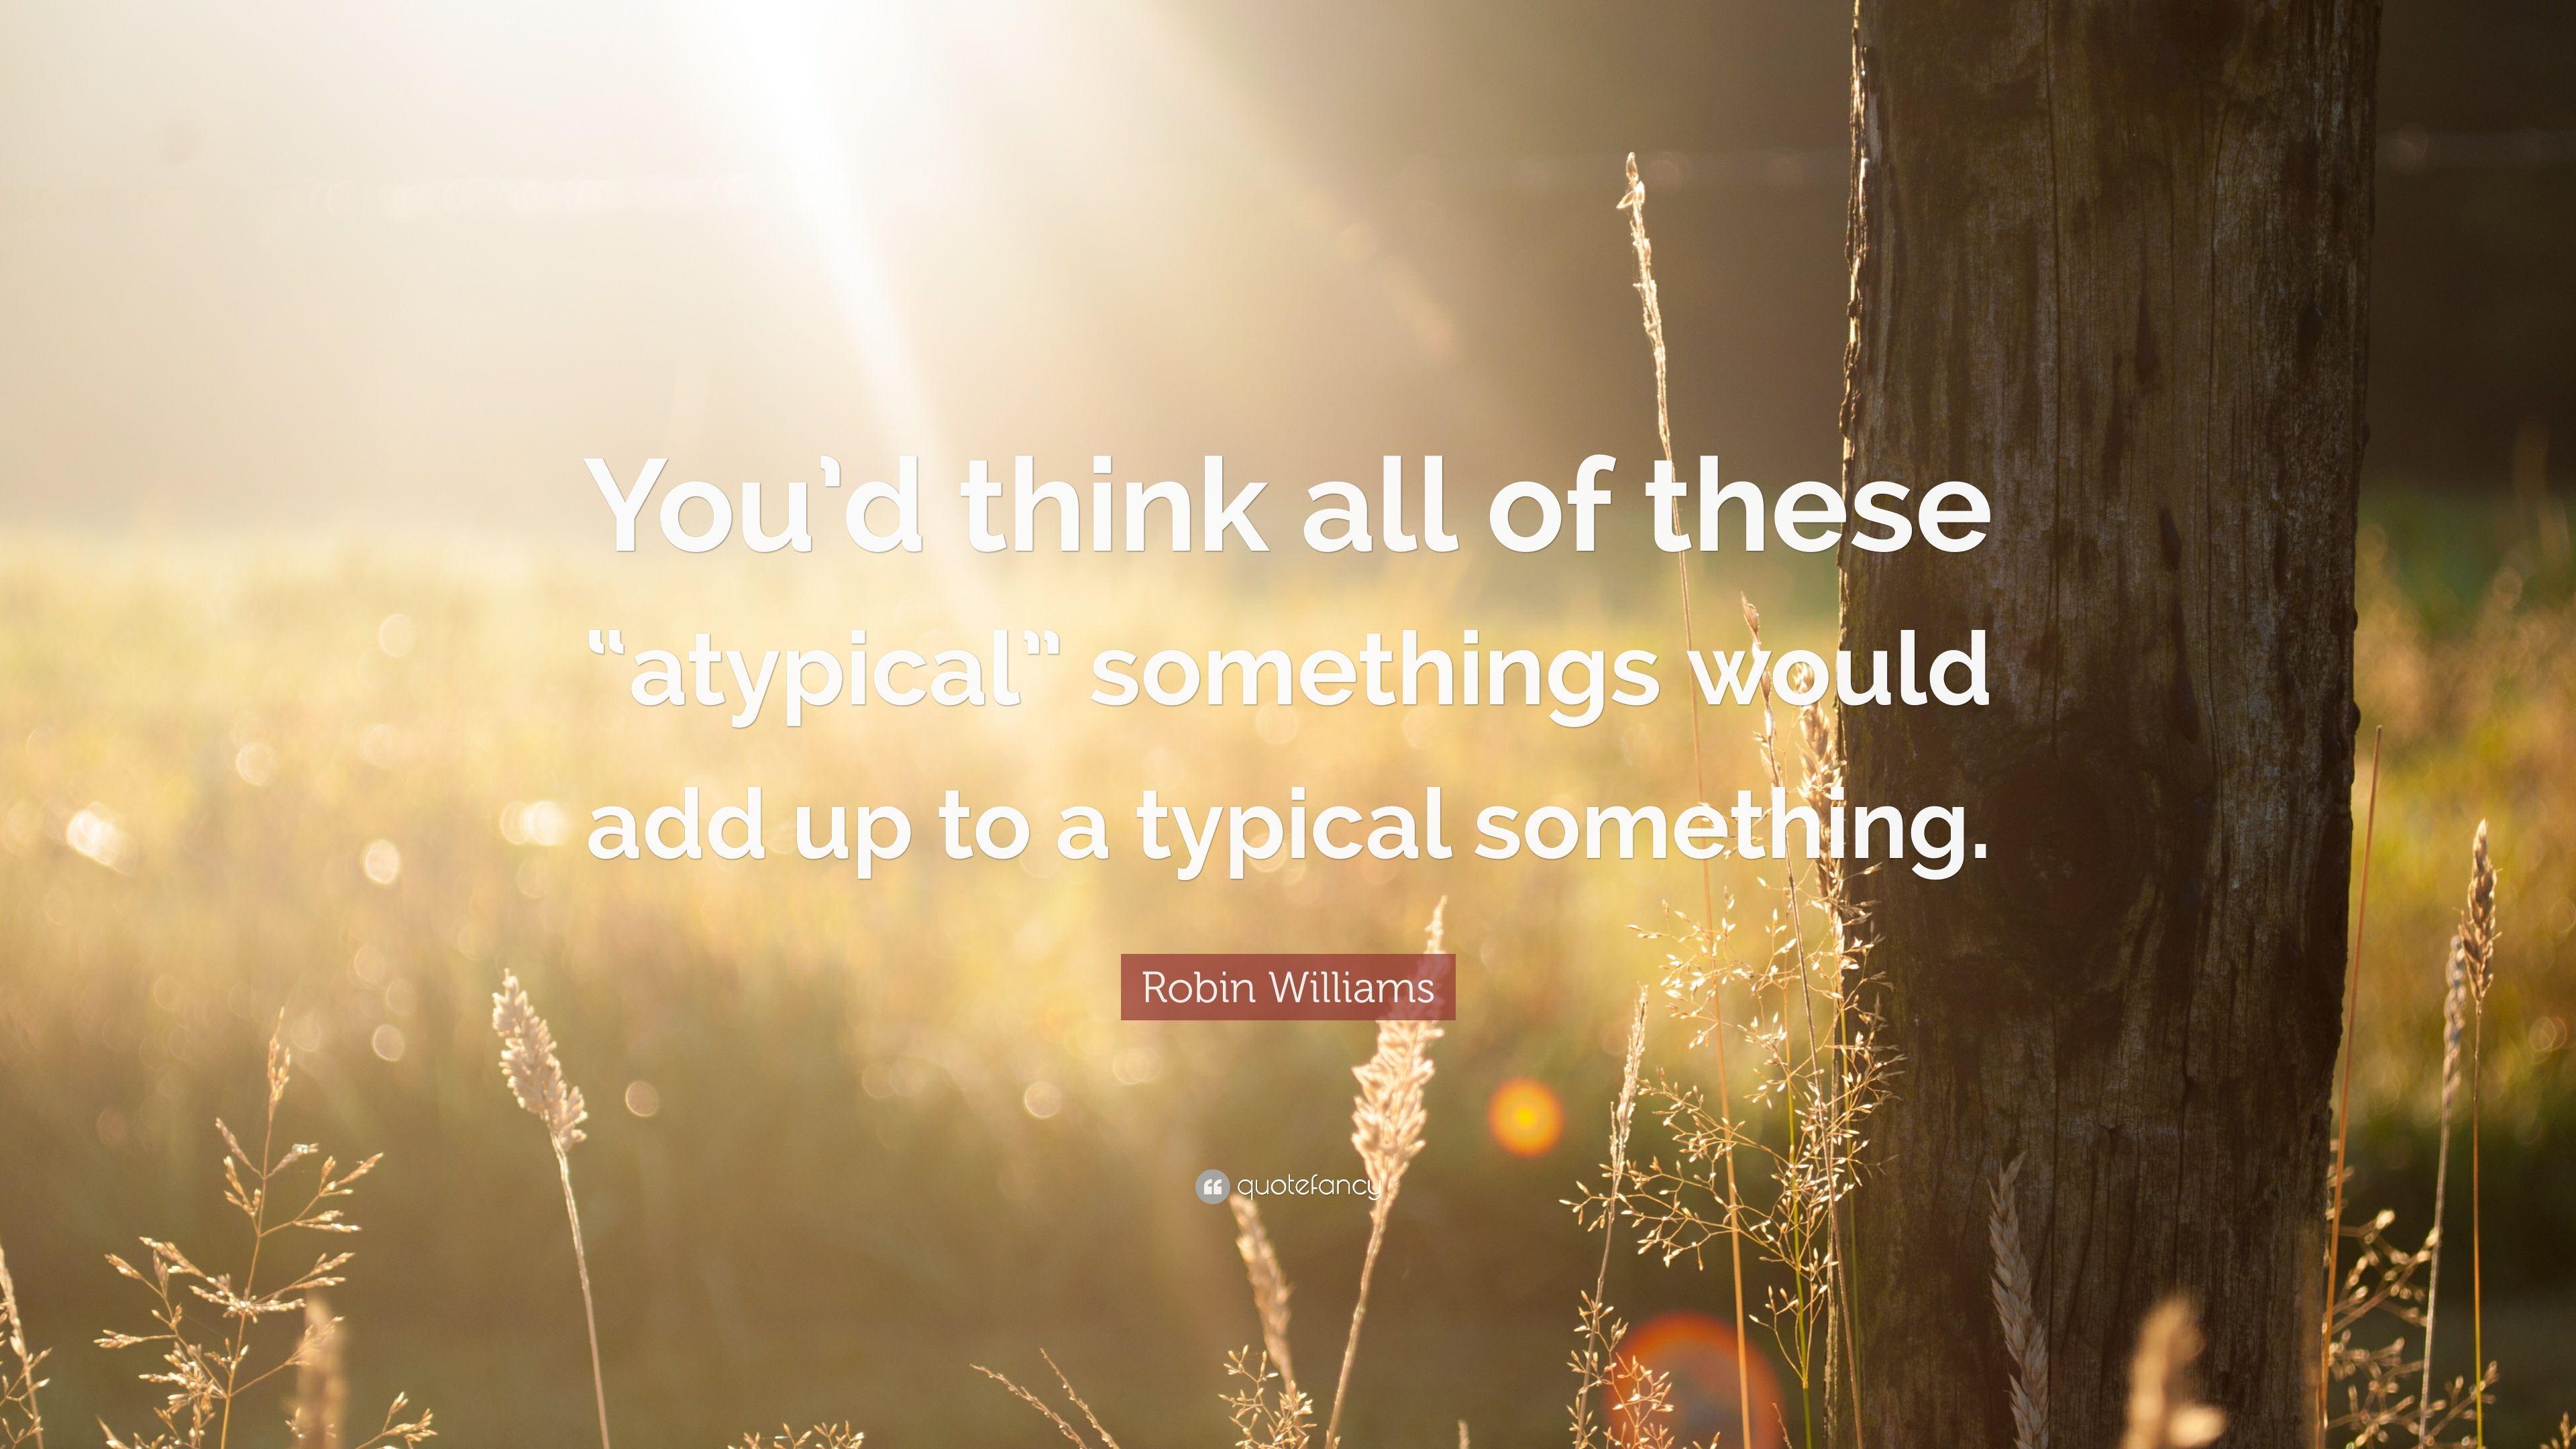 Robin Williams Quote: “You'd think all of these “atypical